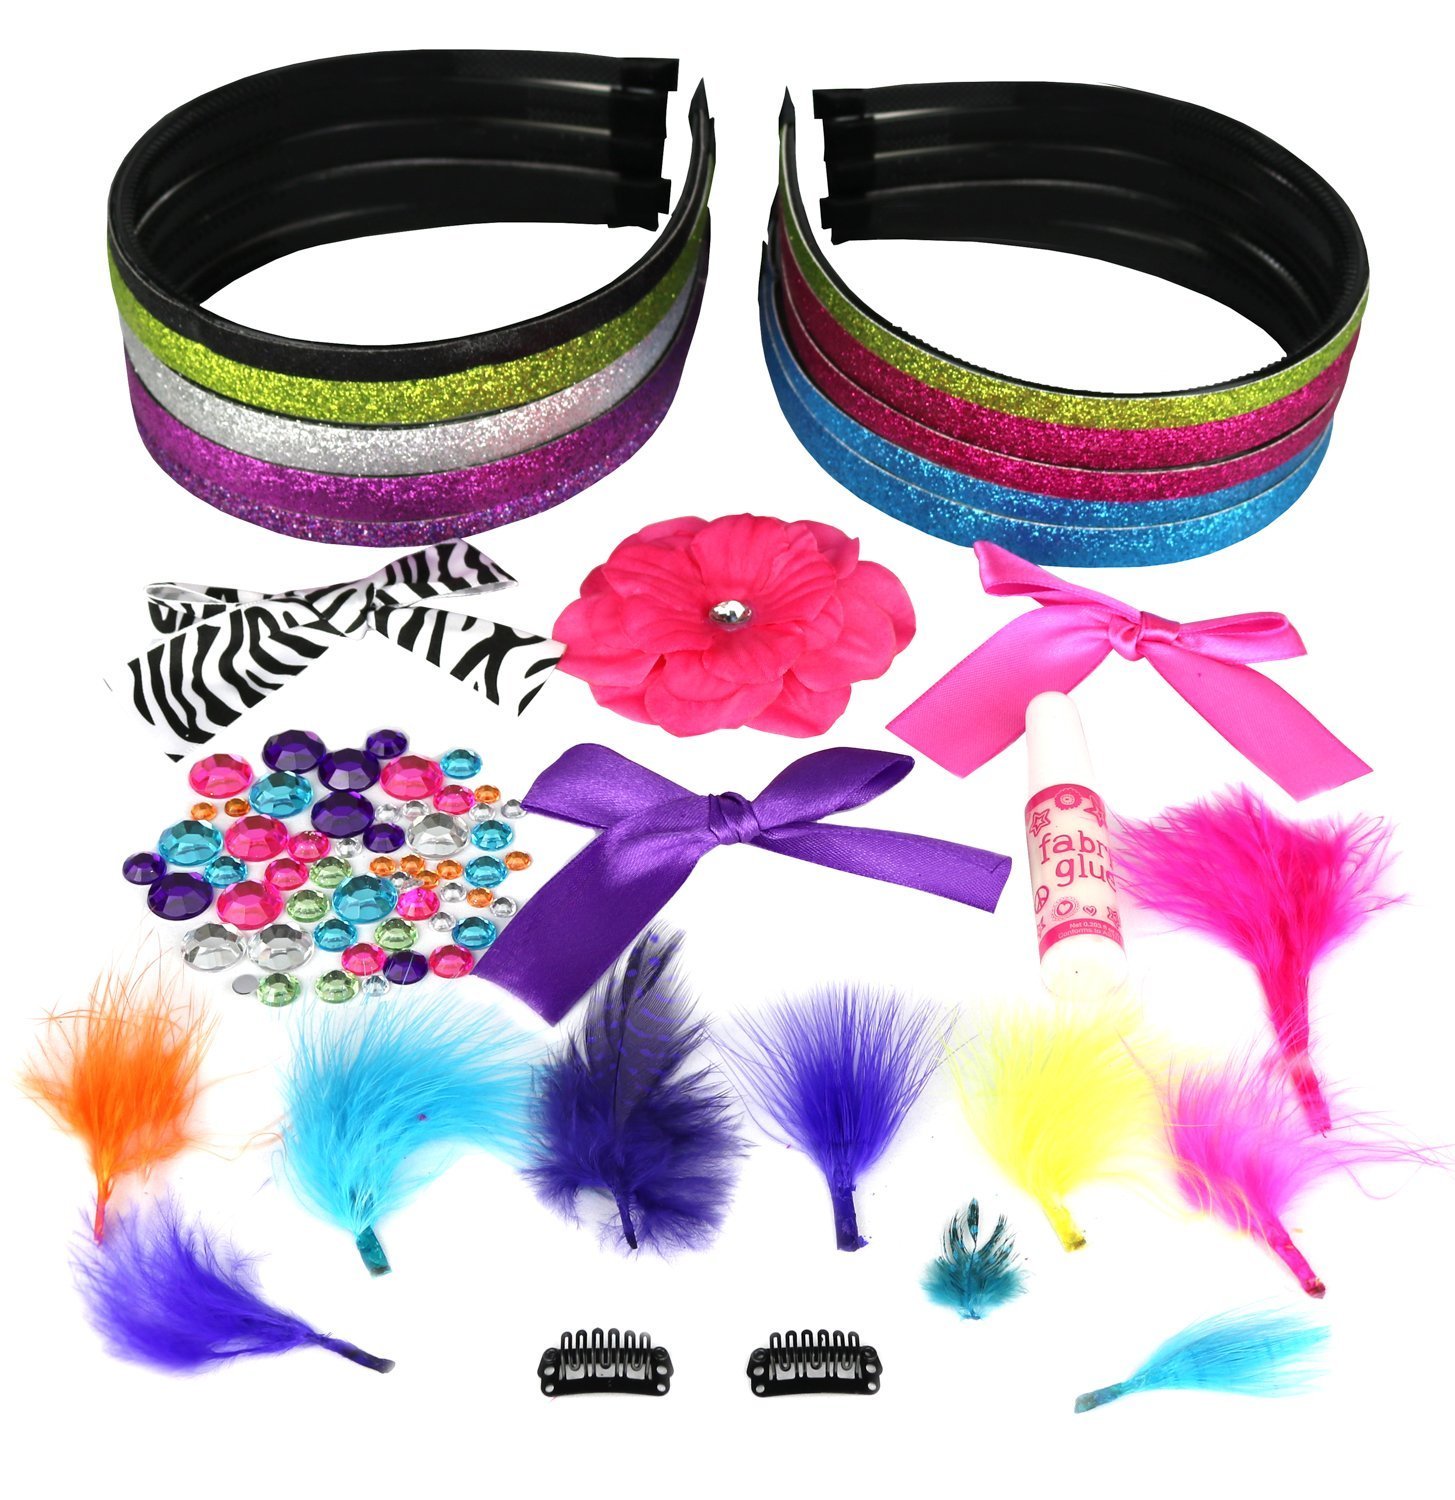 Click N' Play DIY Headband Kit, Create Your Own Headband, Hair Fashion DIY Arts & Crafts Kits for Girls, 10 Colorful Headband + Stylish Accessories, Girl Birthday Party,, Ages 5+ 